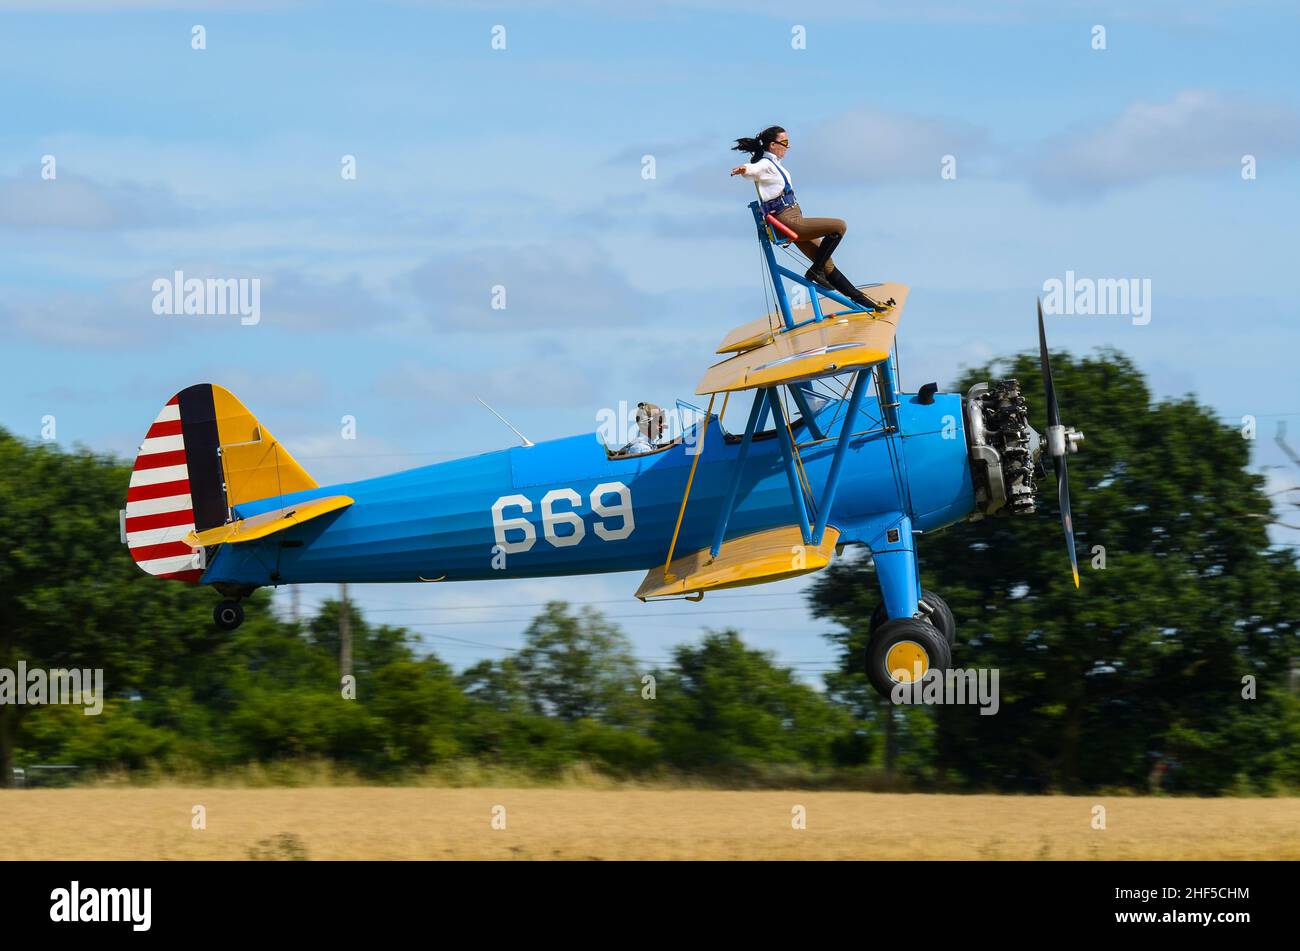 Sarah Niles wingwalking on a Boeing Stearman plane at Damyns Hall Aerodrome with Aerobatic Tactics. Girl on the wing, wing walking. Close to ground Stock Photo